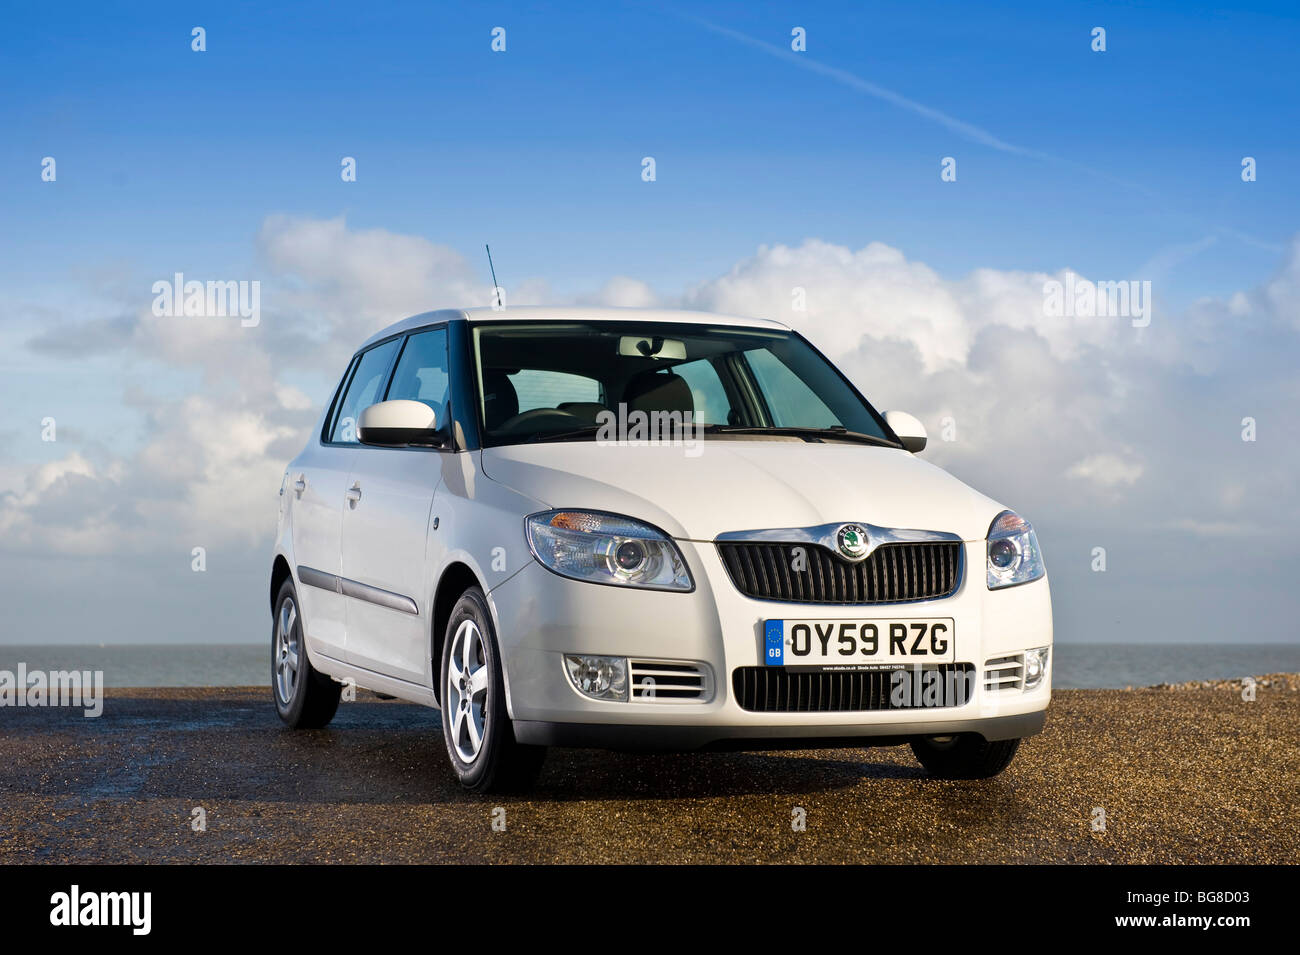 2009 Skoda Fabia Greenline front 3/4  in white with sea background Stock Photo